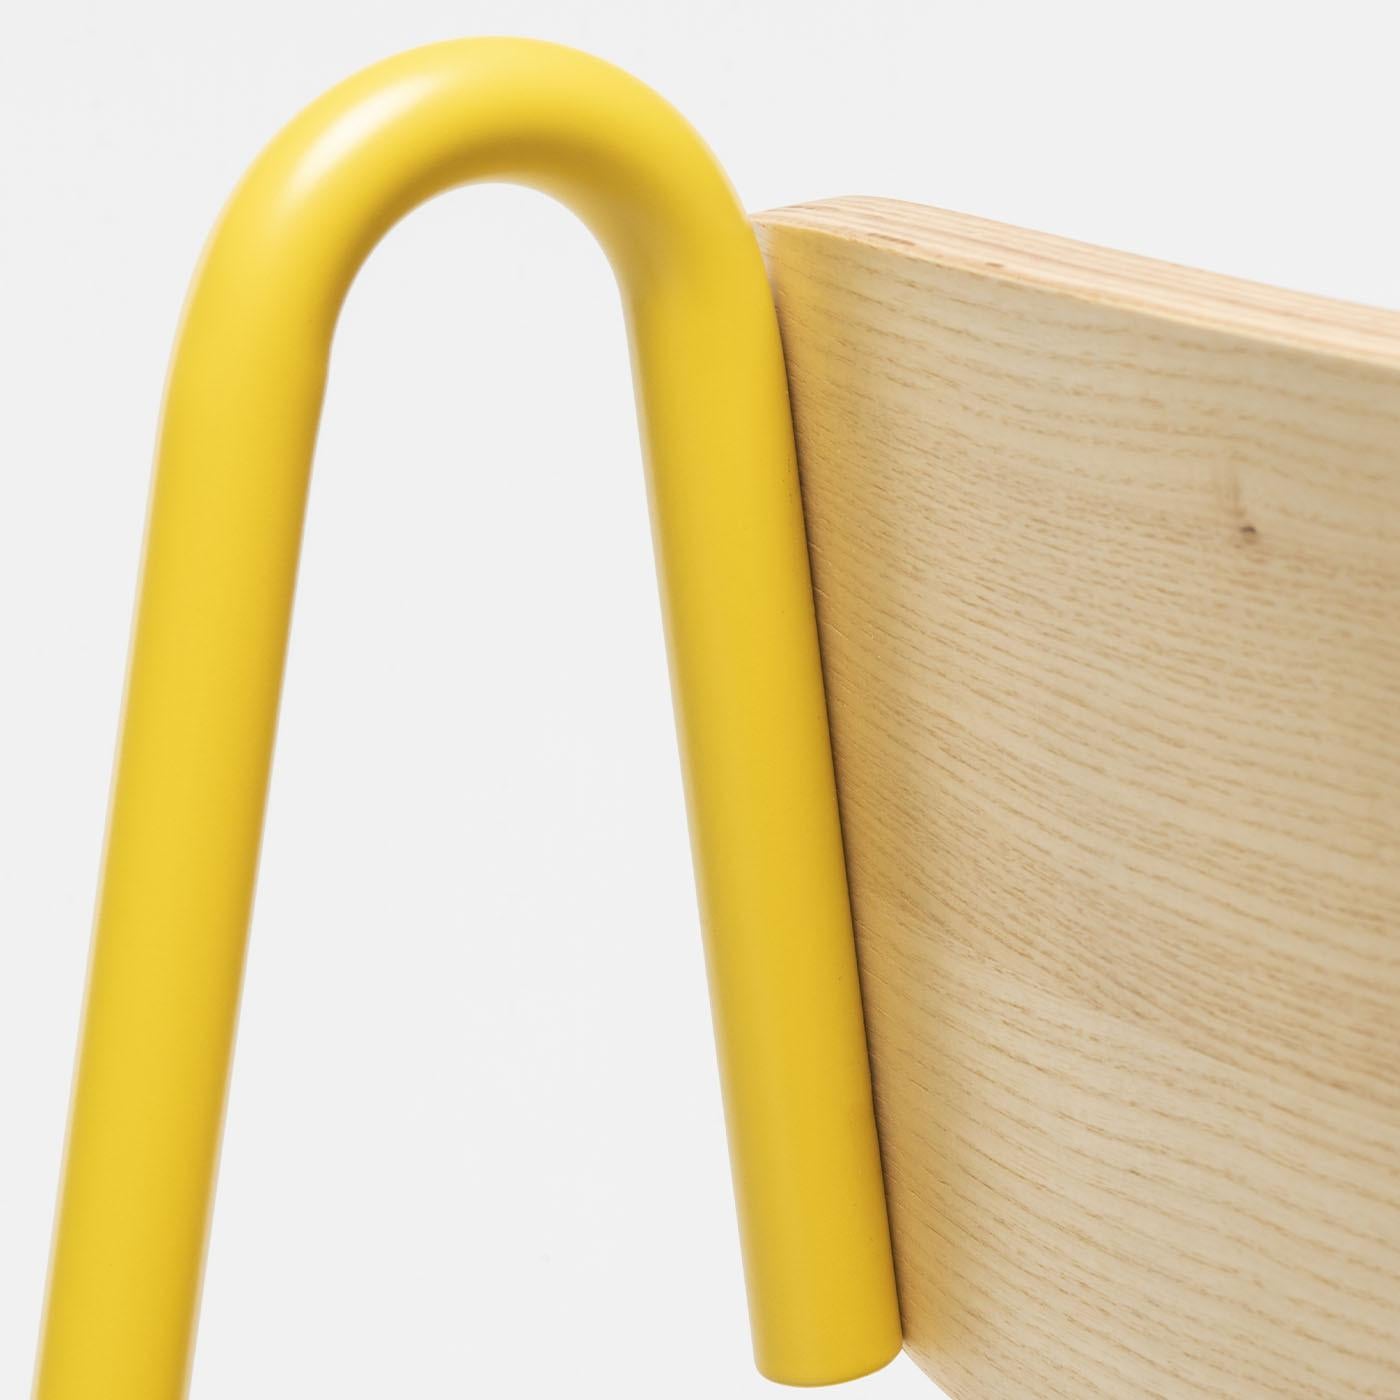 Italian Lena S Yellow And Natural Ash Chair By Designerd For Sale